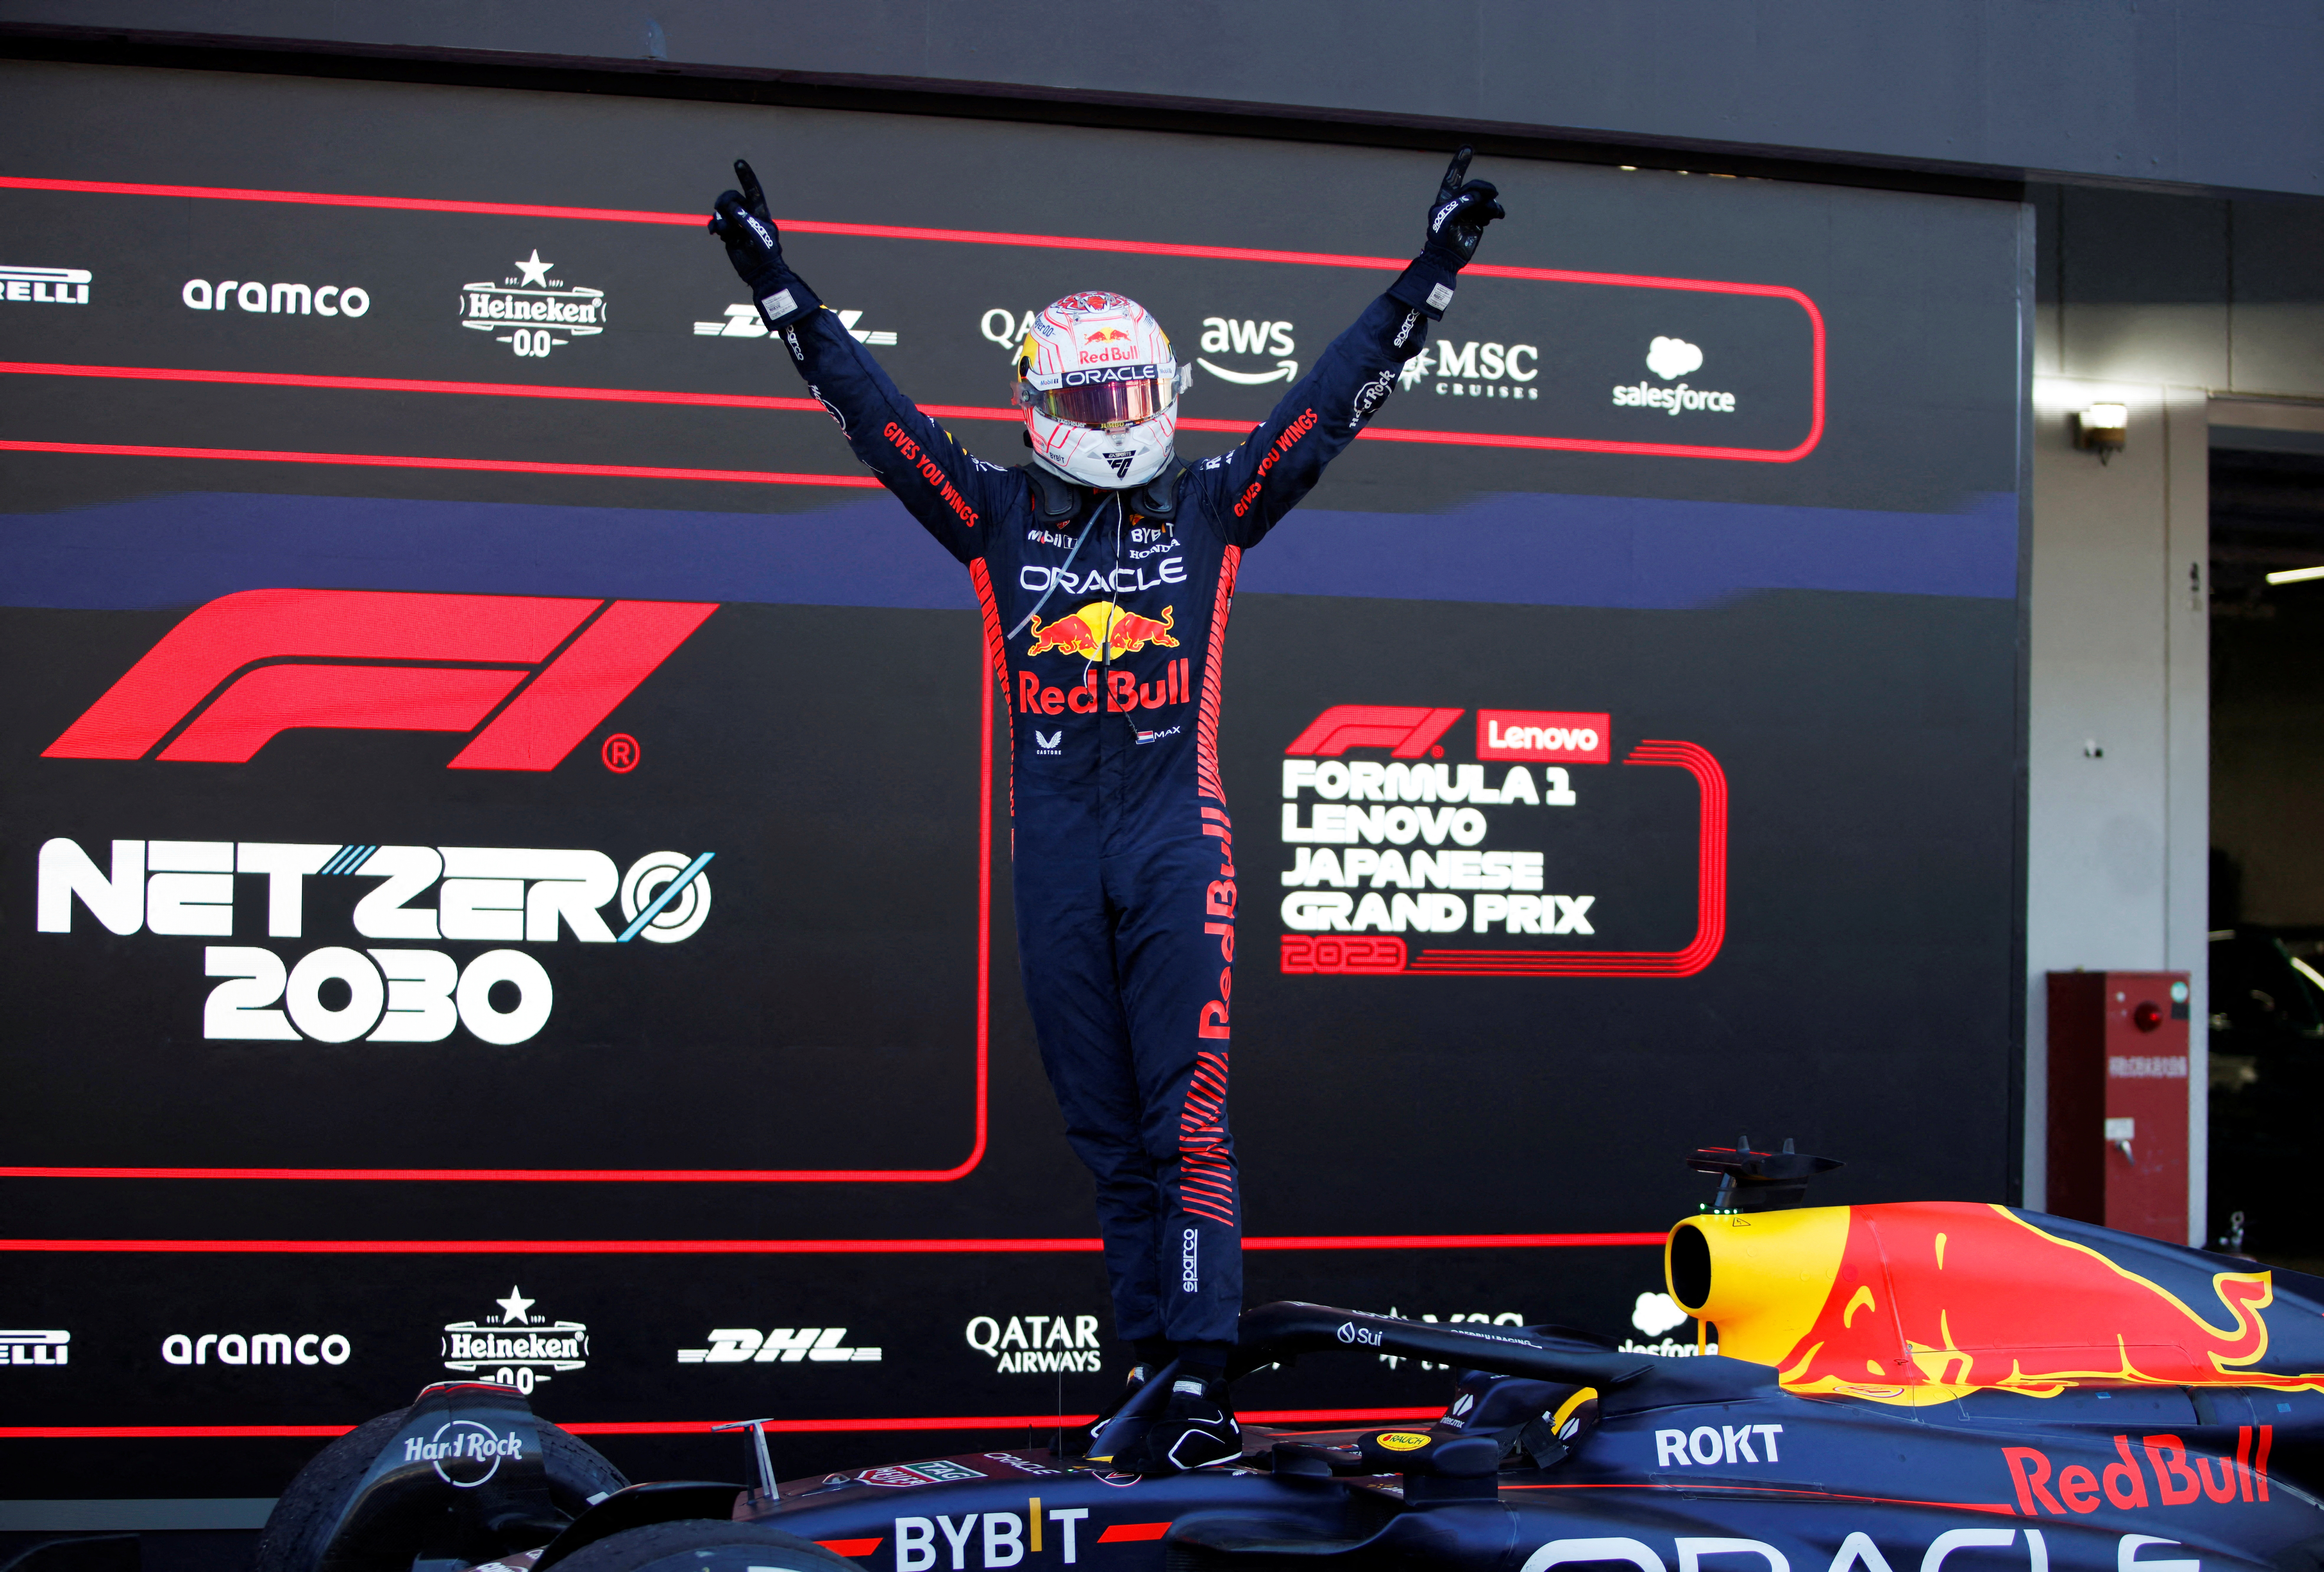 Verstappen to continue Red Bull's title celebrations